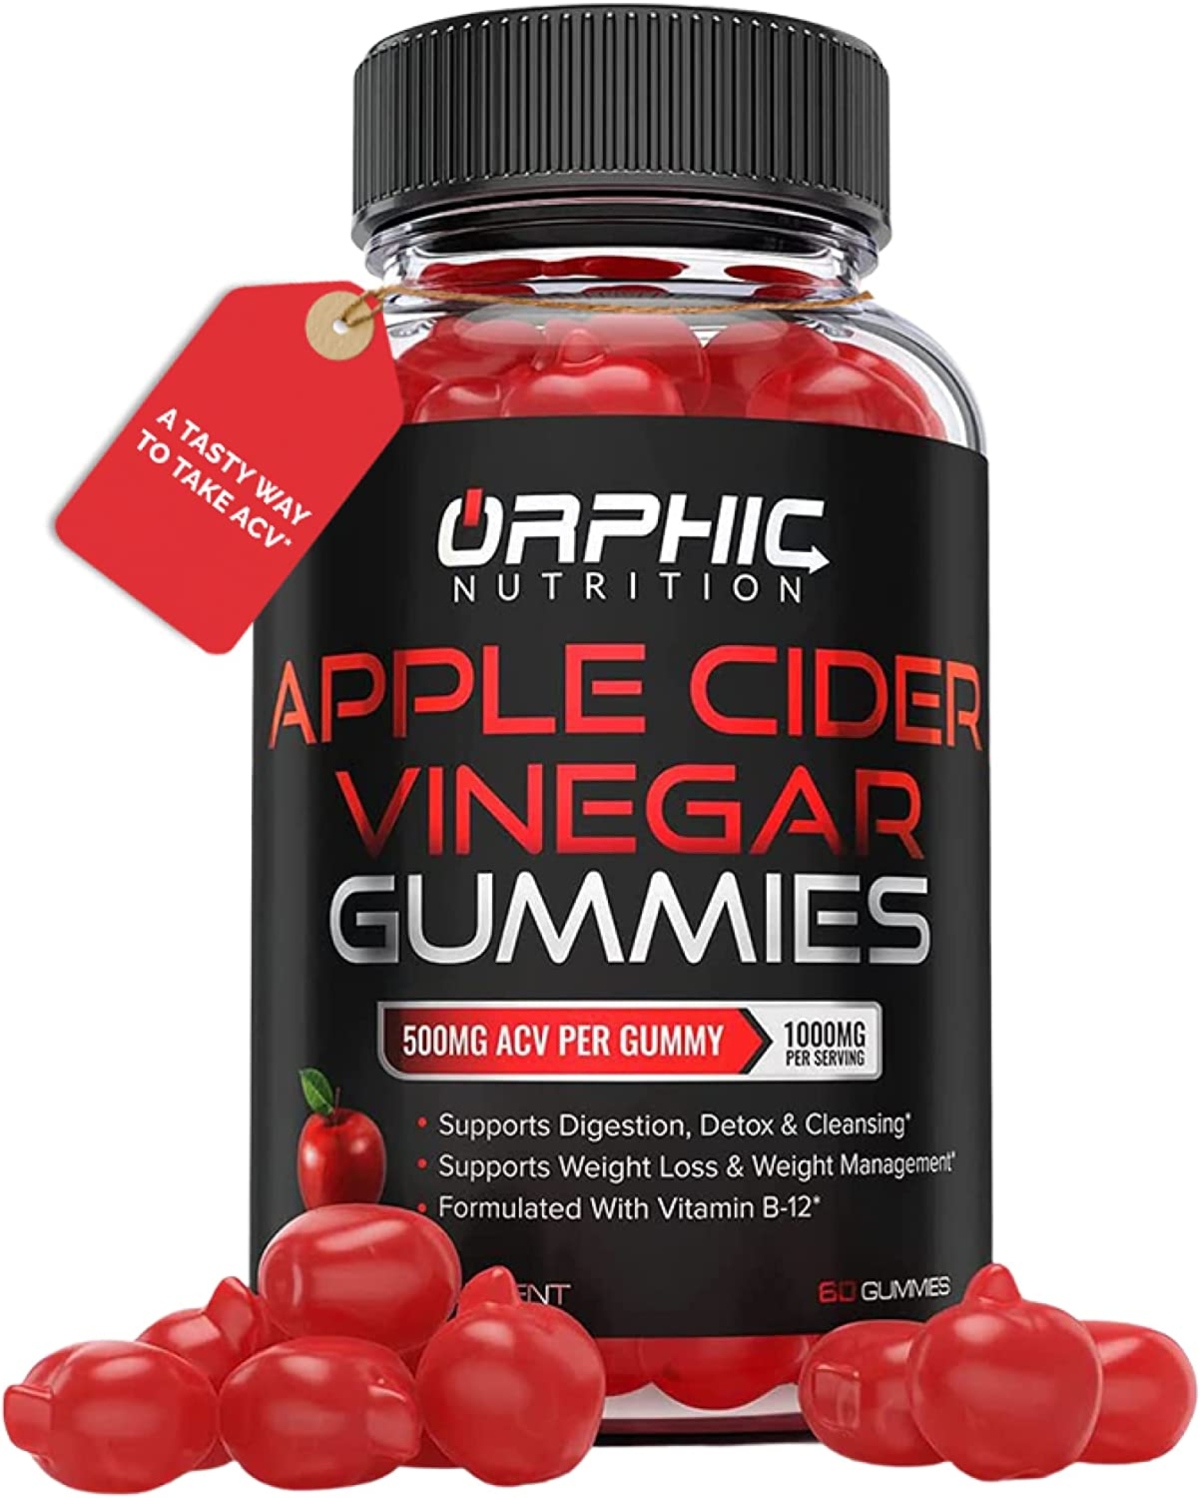 Apple Cider Vinegar Gummies - 1000mg -Formulated to Support Weight Loss